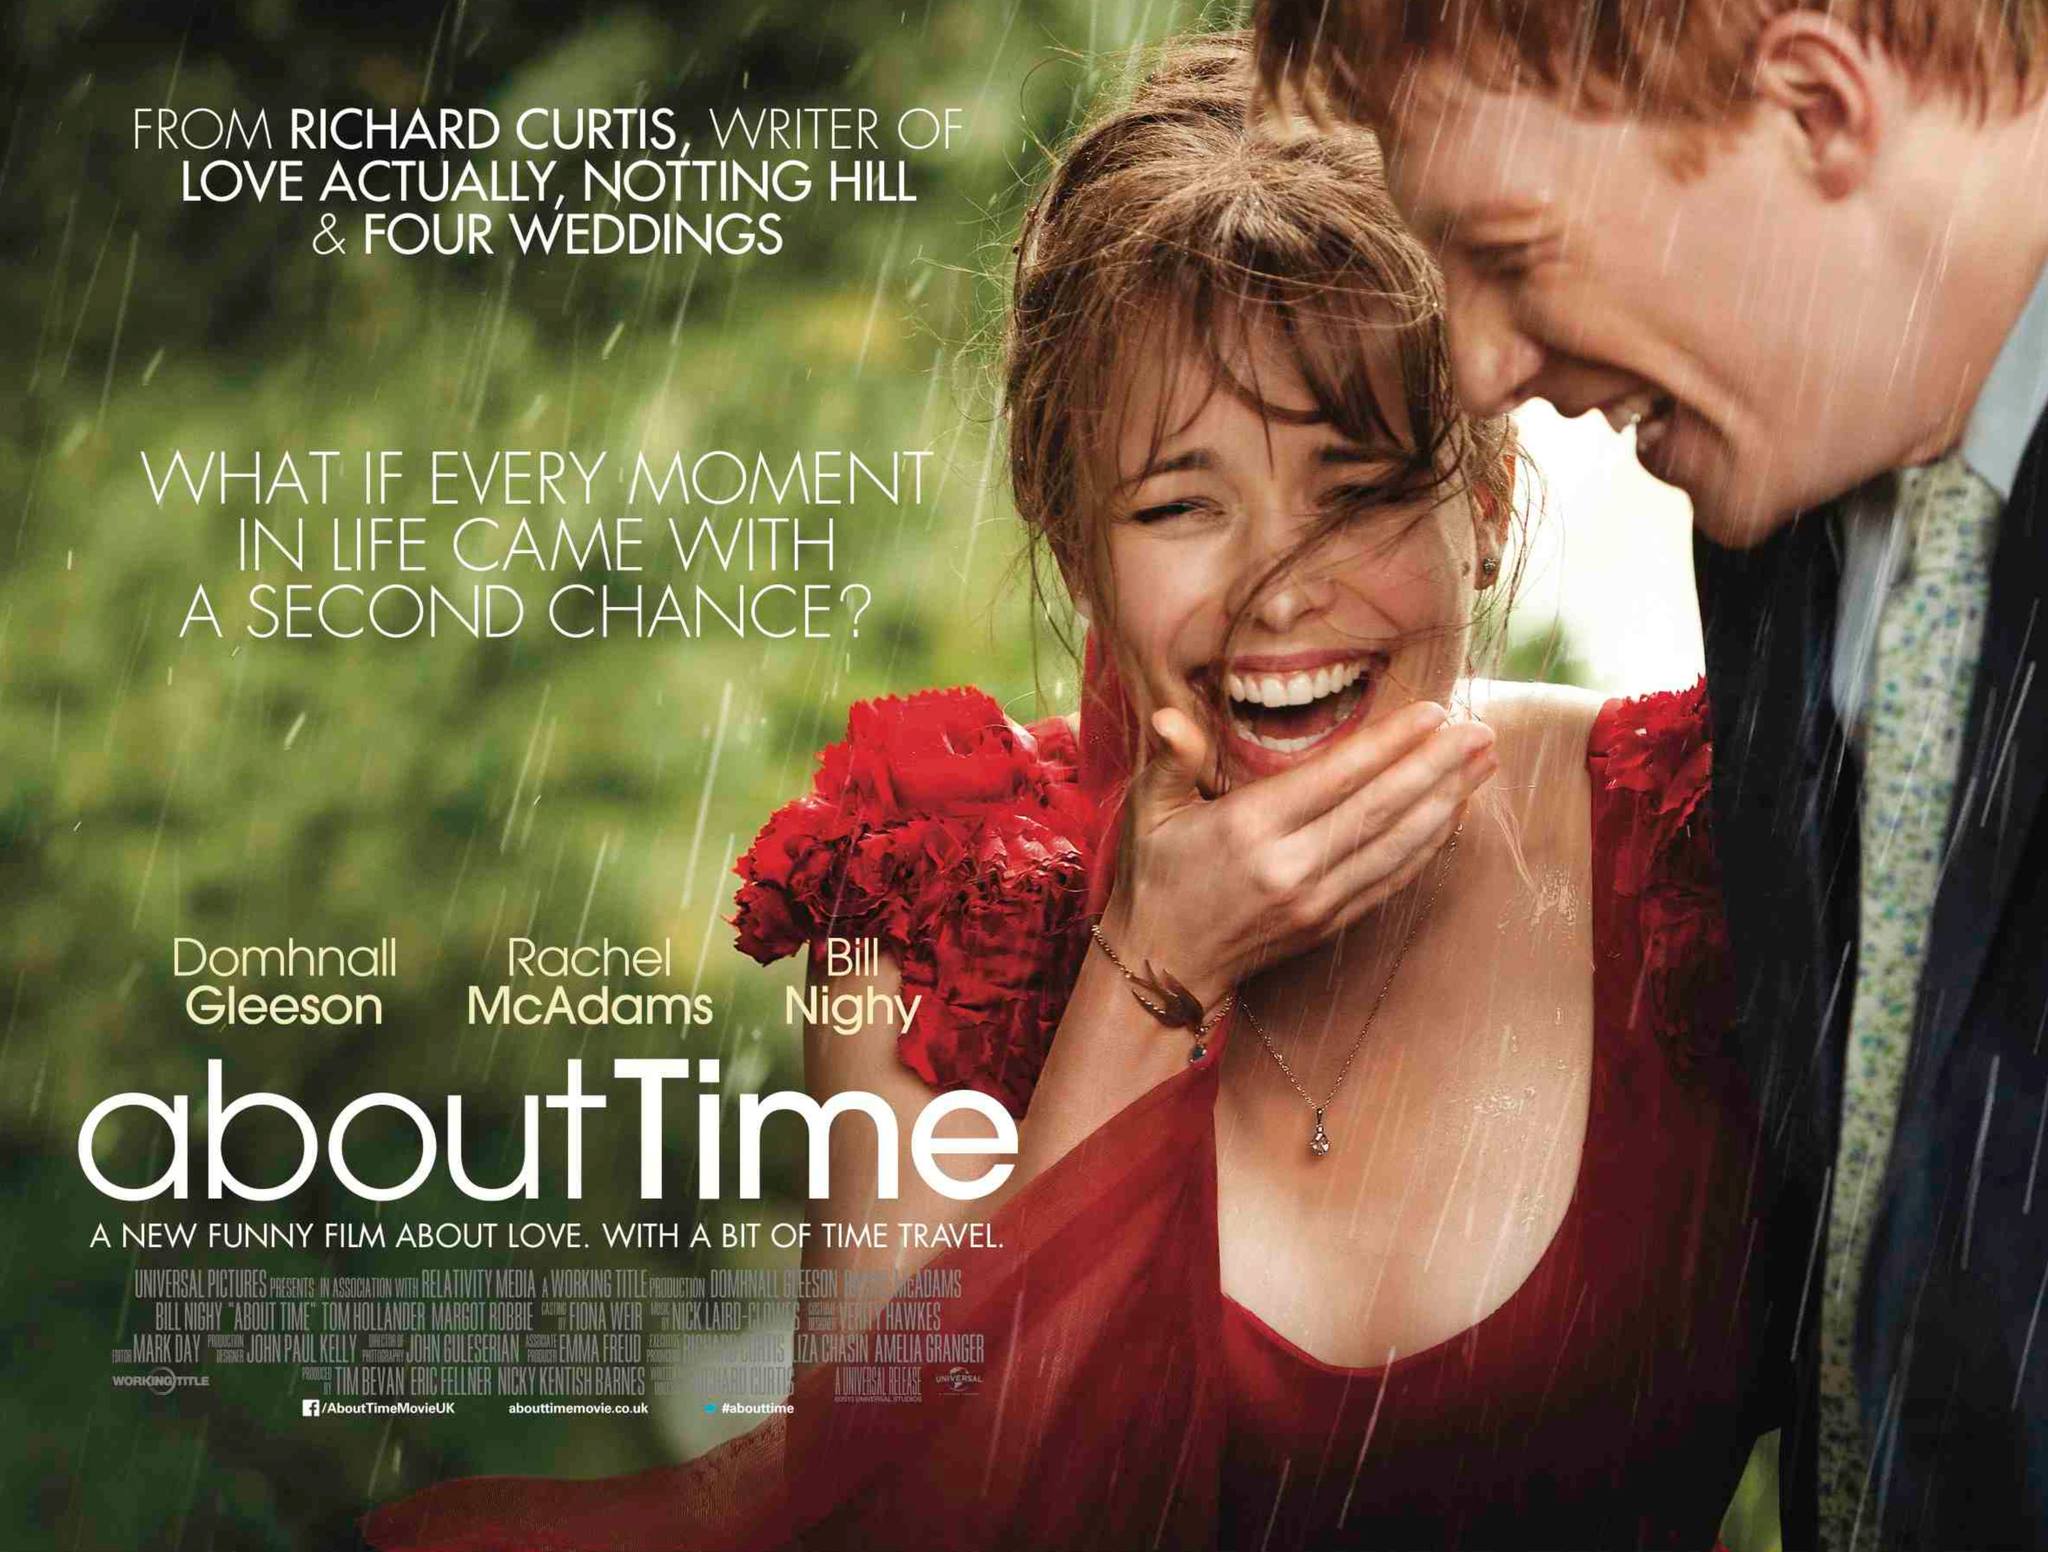 http://www.heyuguys.co.uk/images/2013/06/About-Time-UK-Quad-Poster.jpg